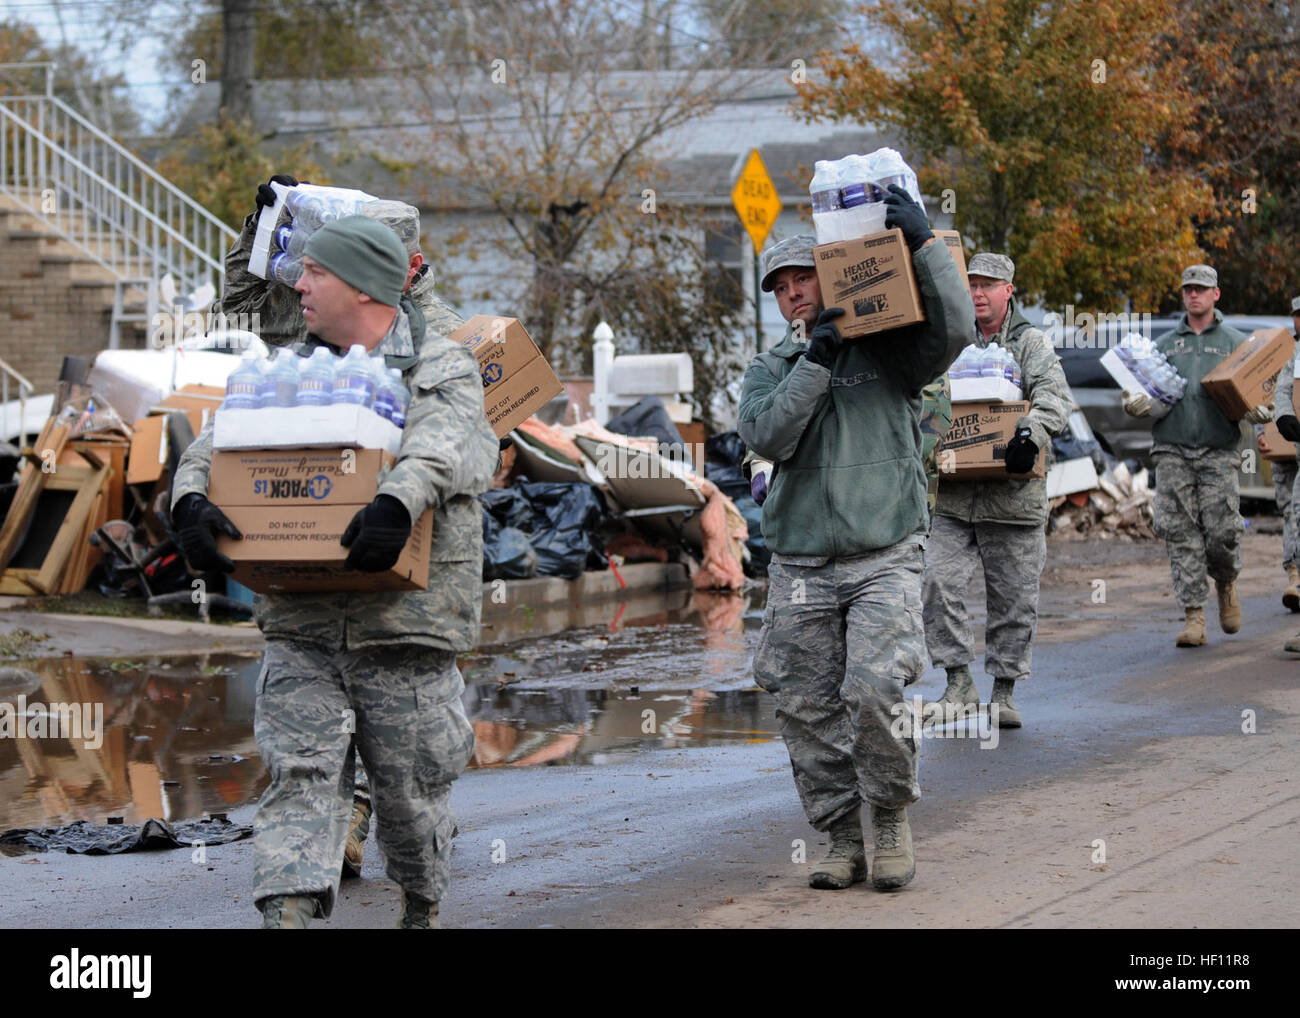 New York Air National Guard Master Sgt. Thomas Moade from the 174th Attack Wing out of Syracuse leads other members of the 174th as well as members of the New York Army Guard from Newburg in taking water and cases of food to local residents in Staten Island on 2 November 2012. The food and water was provided to people who needed assistance after hurricane Sandy took down power lines and caused massive destruction to many homes in the area leaving families desperate for help. Moade and the others were taking the food to those who could not make it to the Emergency Response location. (New York A Stock Photo